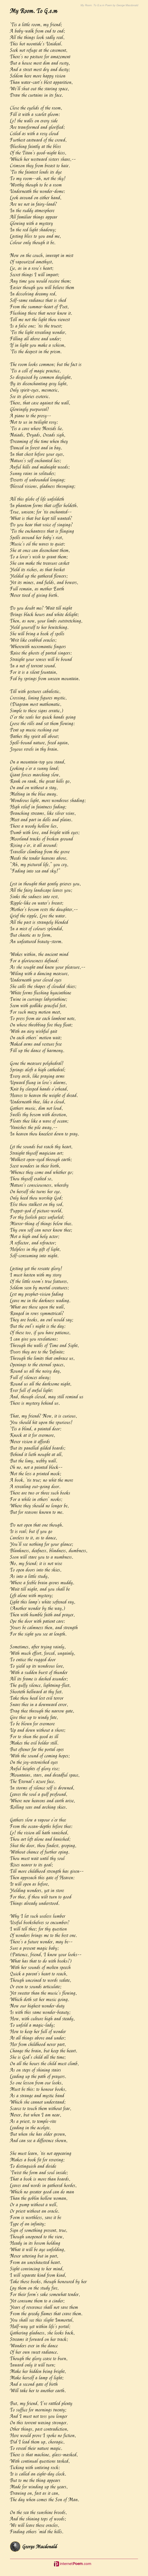 My Room To G E M Poem By George Macdonald